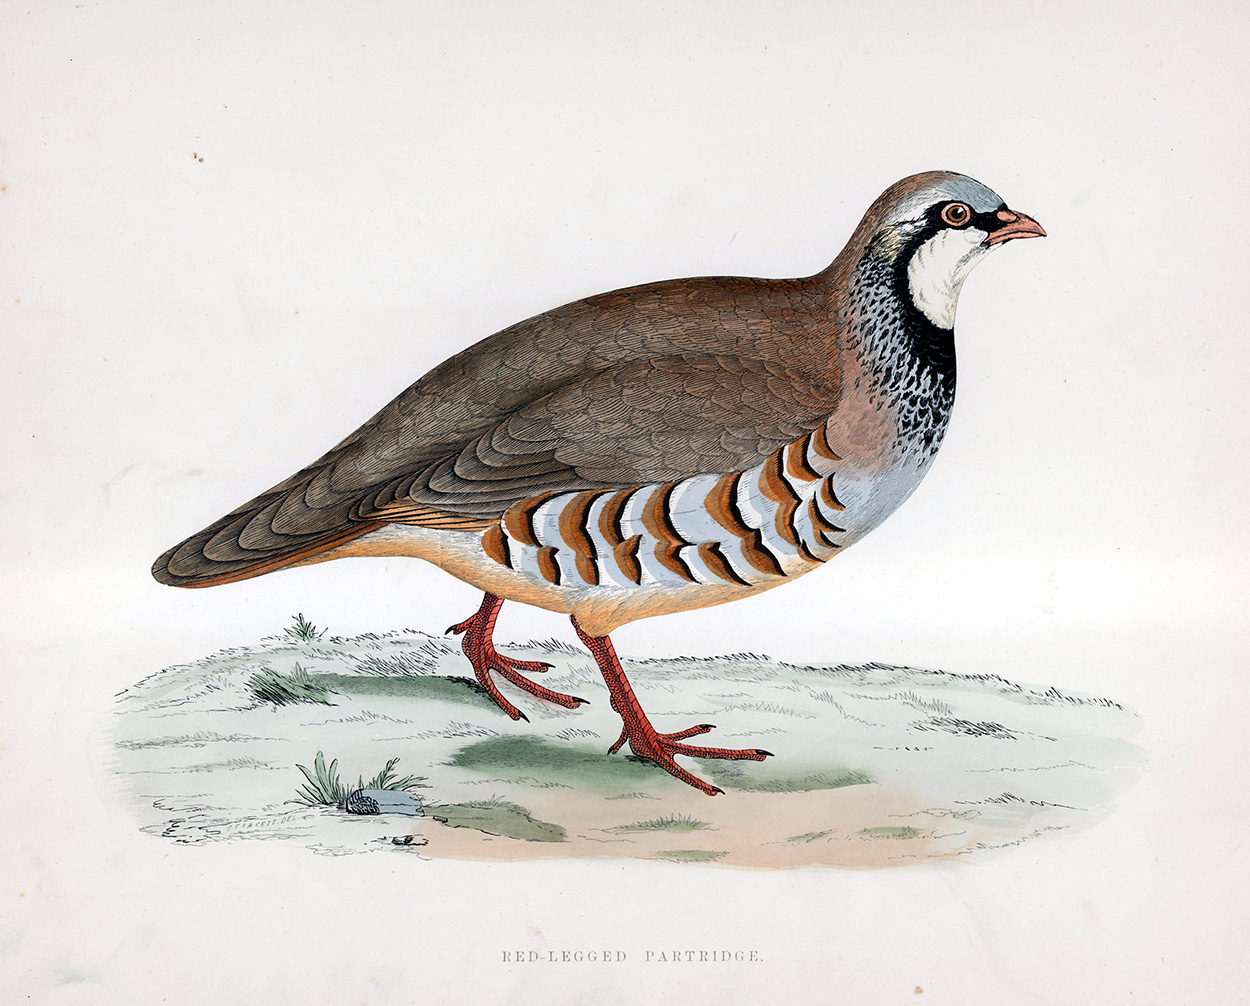 Red Legged Partridge - hand coloured lithograph 1891 (Print) art by Beverley R Morris at The Illustration Art Gallery